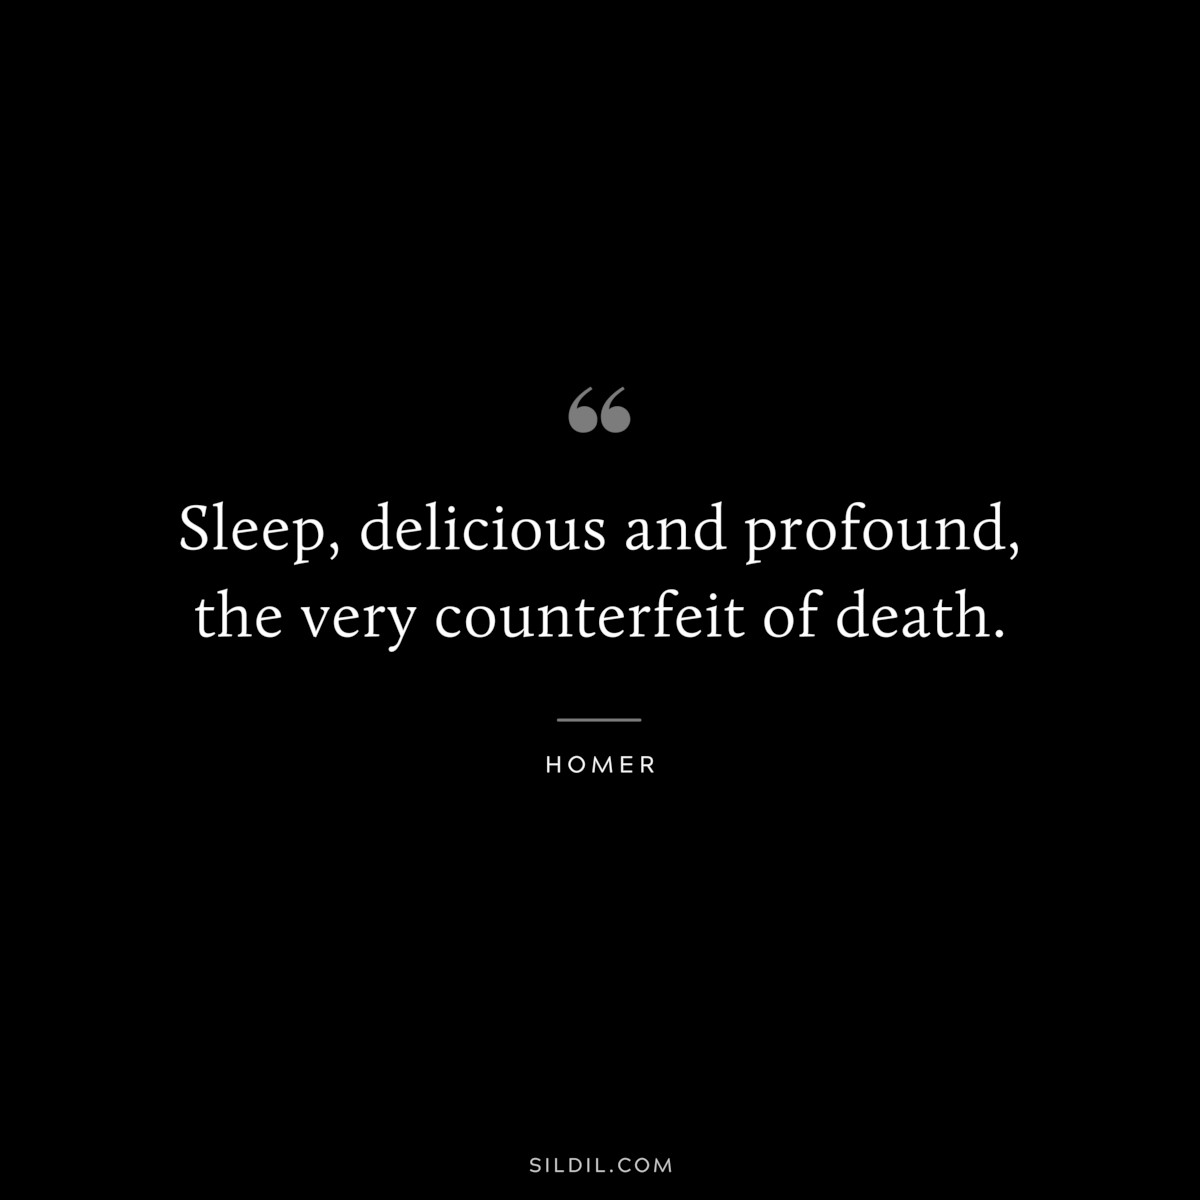 Sleep, delicious and profound, the very counterfeit of death. ― Homer